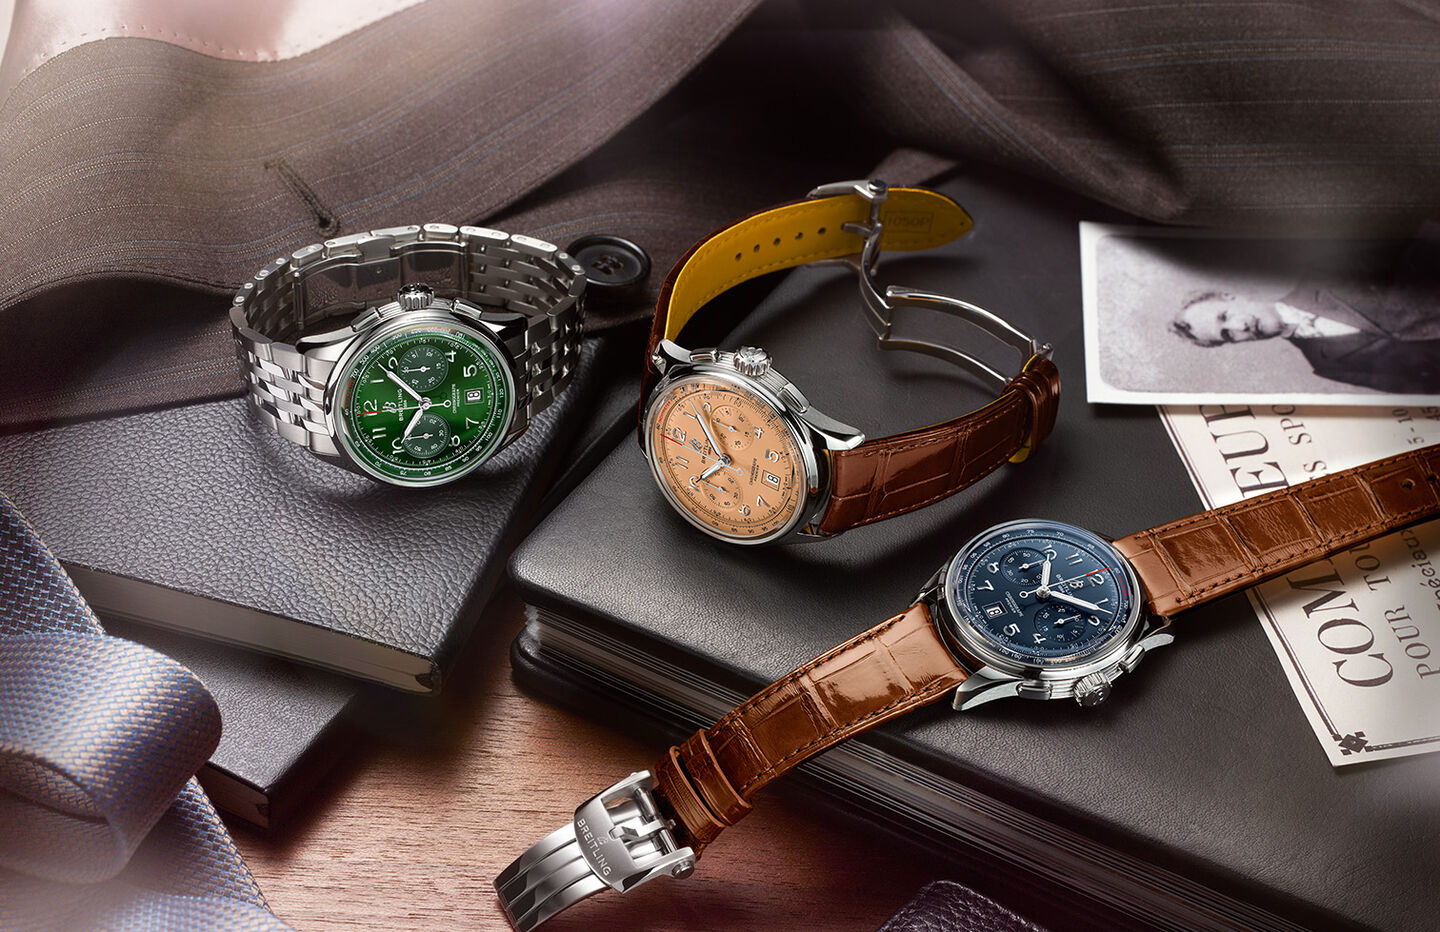 Three Breitling watches sit atop of a pile of leather-bound notebooks